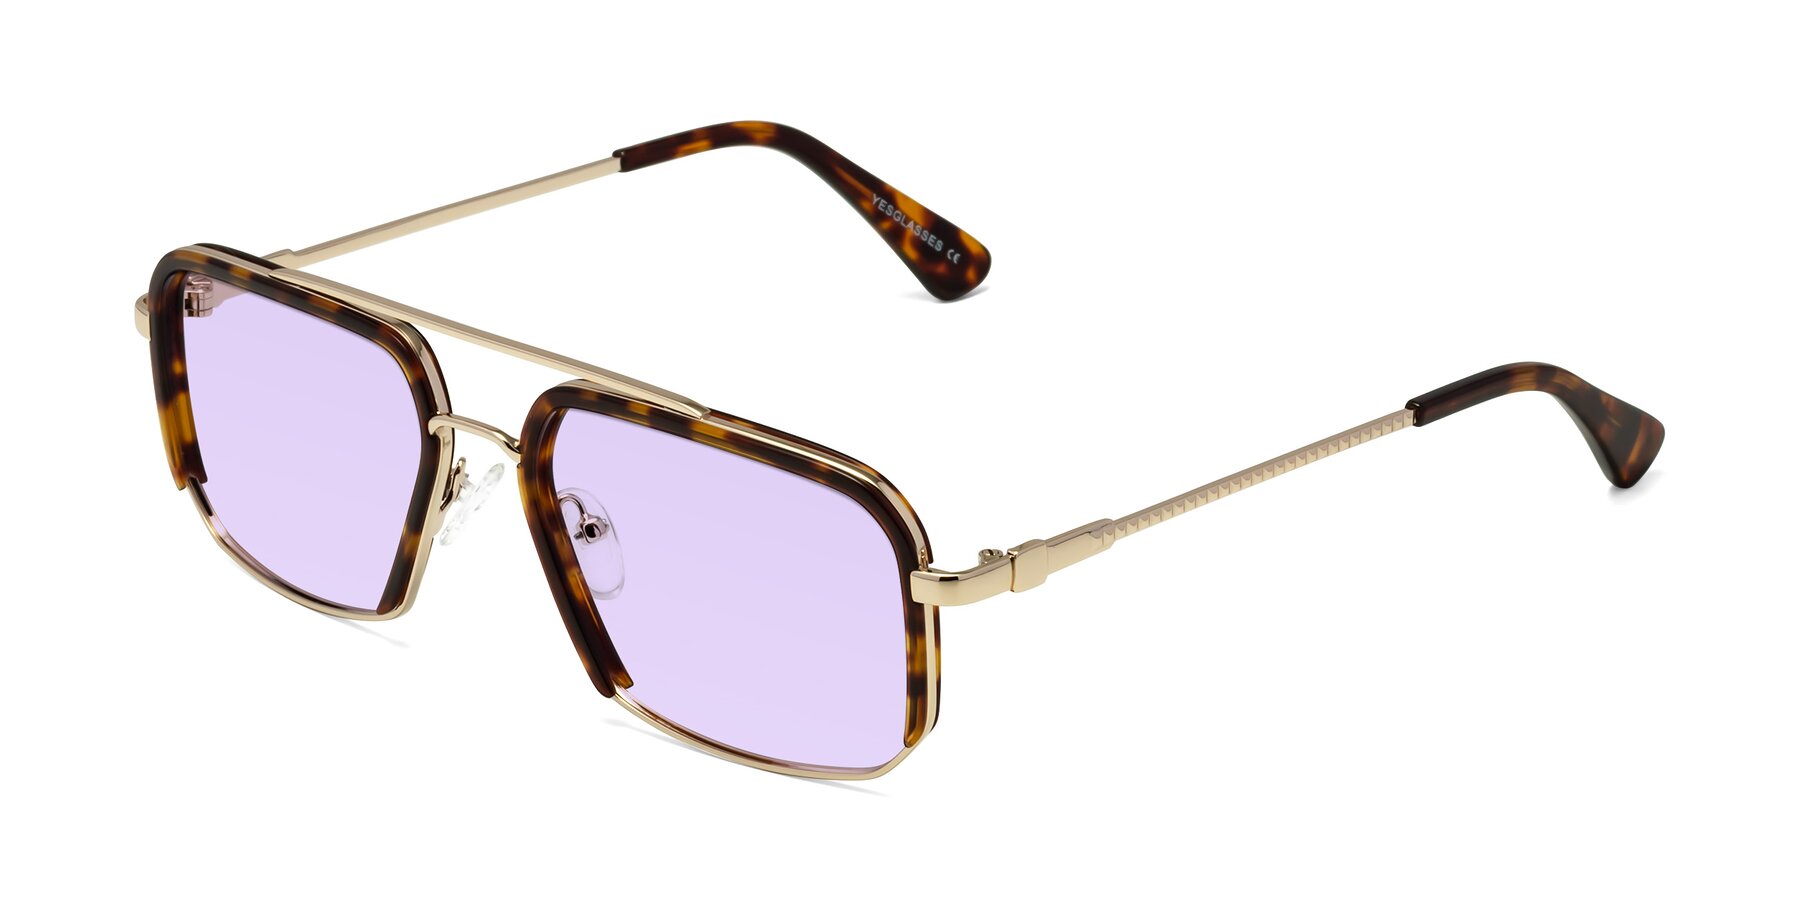 Angle of Dechter in Tortoise-Gold with Light Purple Tinted Lenses